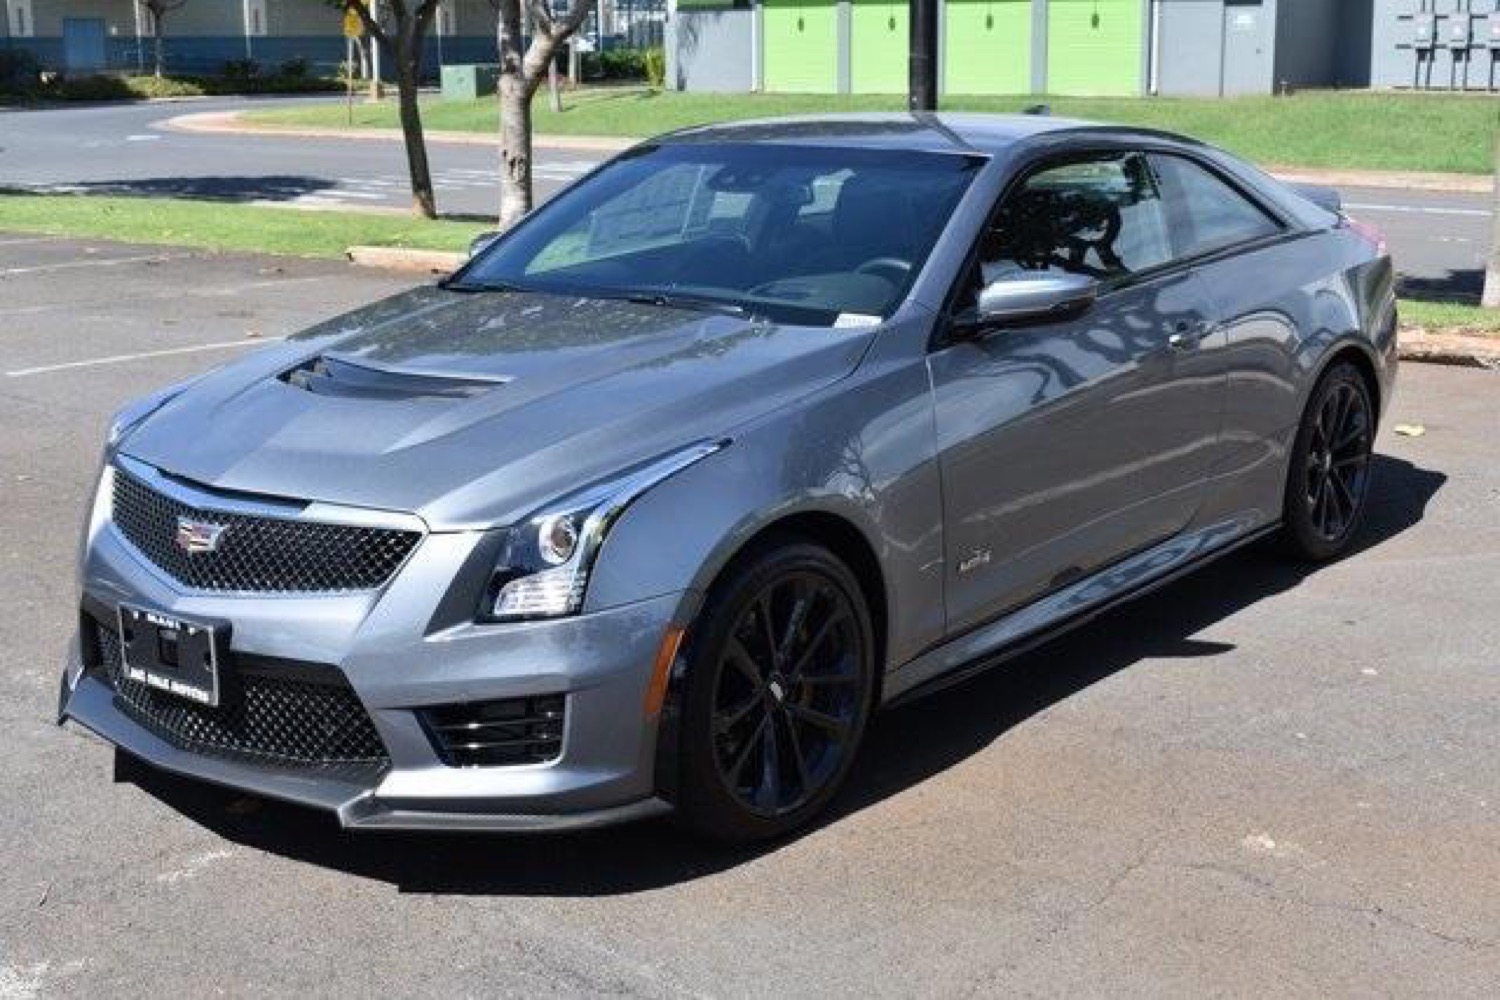 New 2018 Cadillac ATS-V Coupe For Sale At Dealer In Hawaii ...